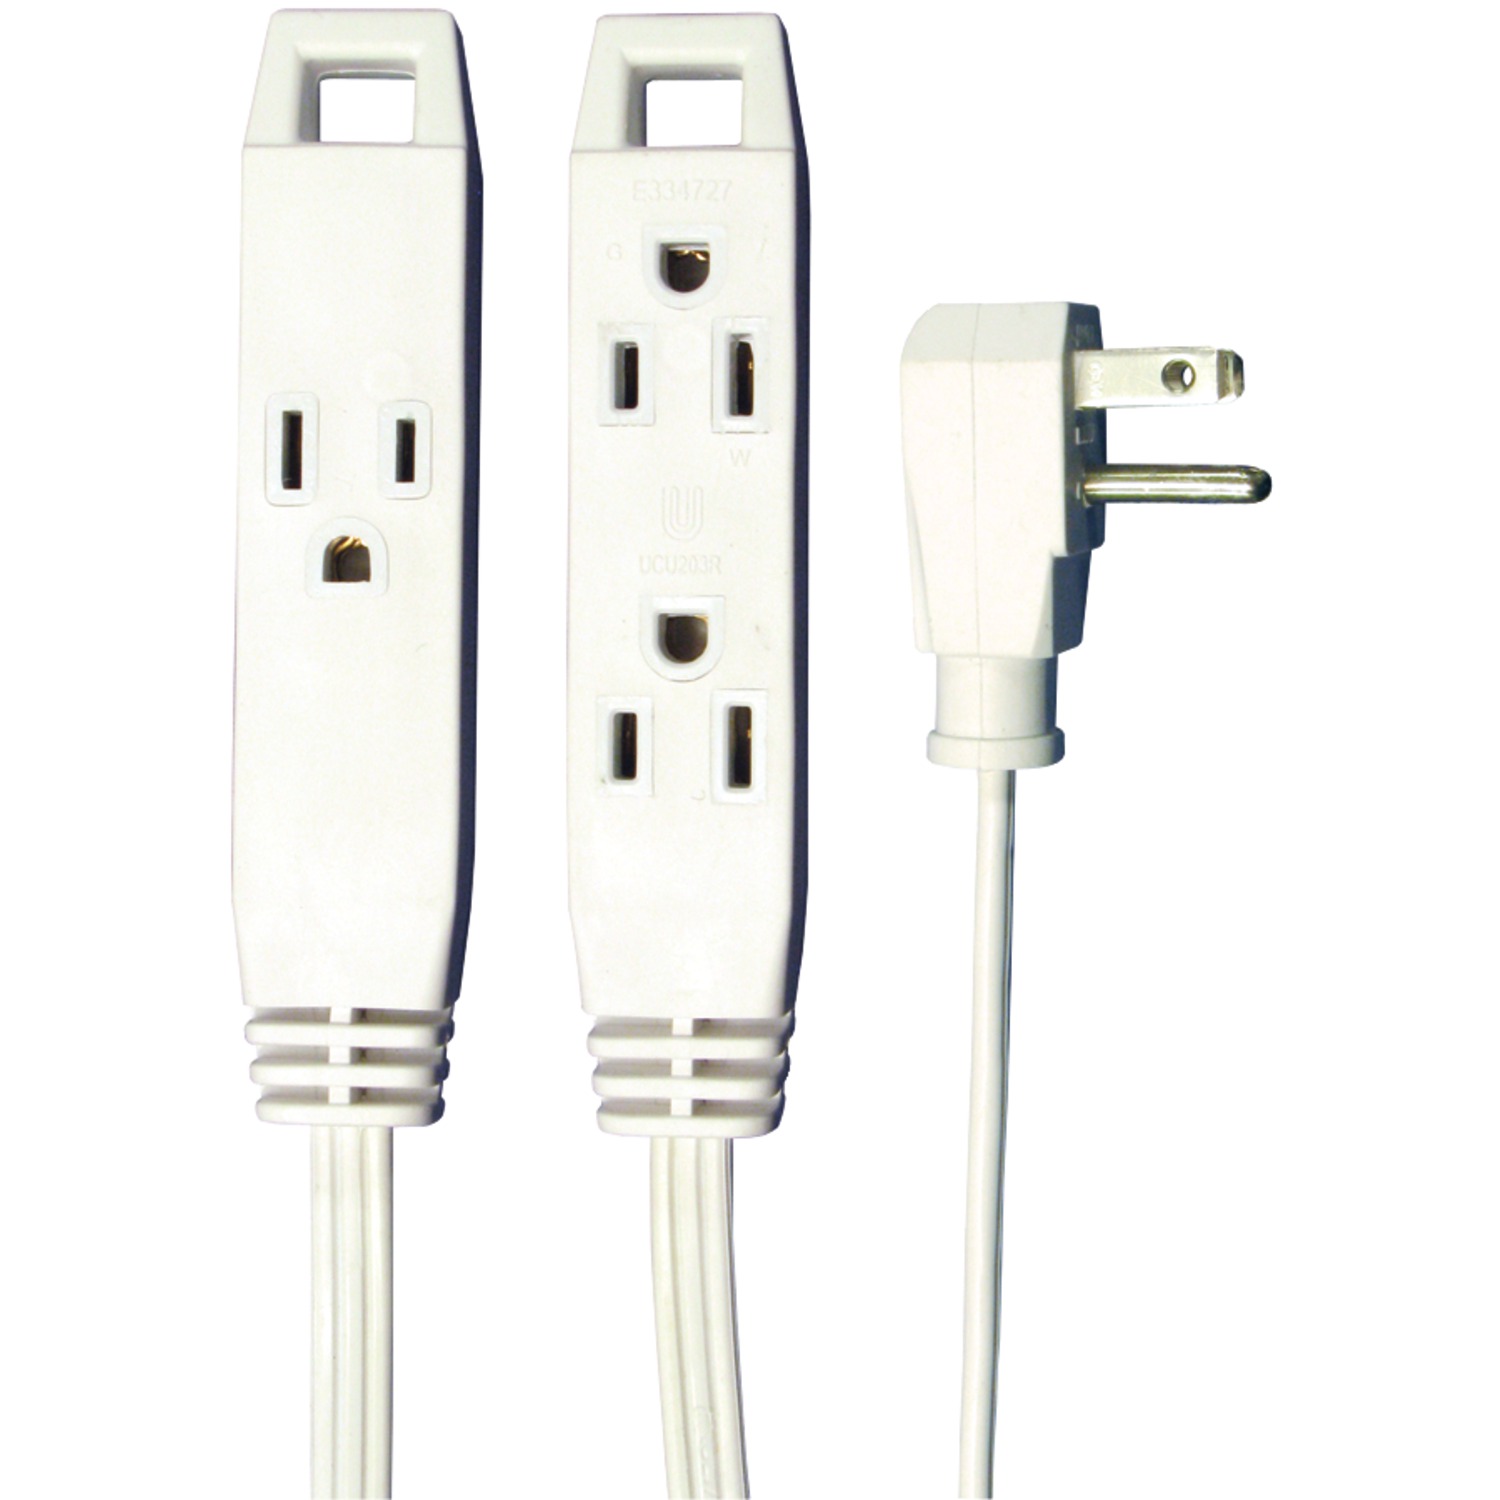 Axis 3-outlet Indoor Extension Cord, 8ft (white) 4 Pack - image 1 of 11